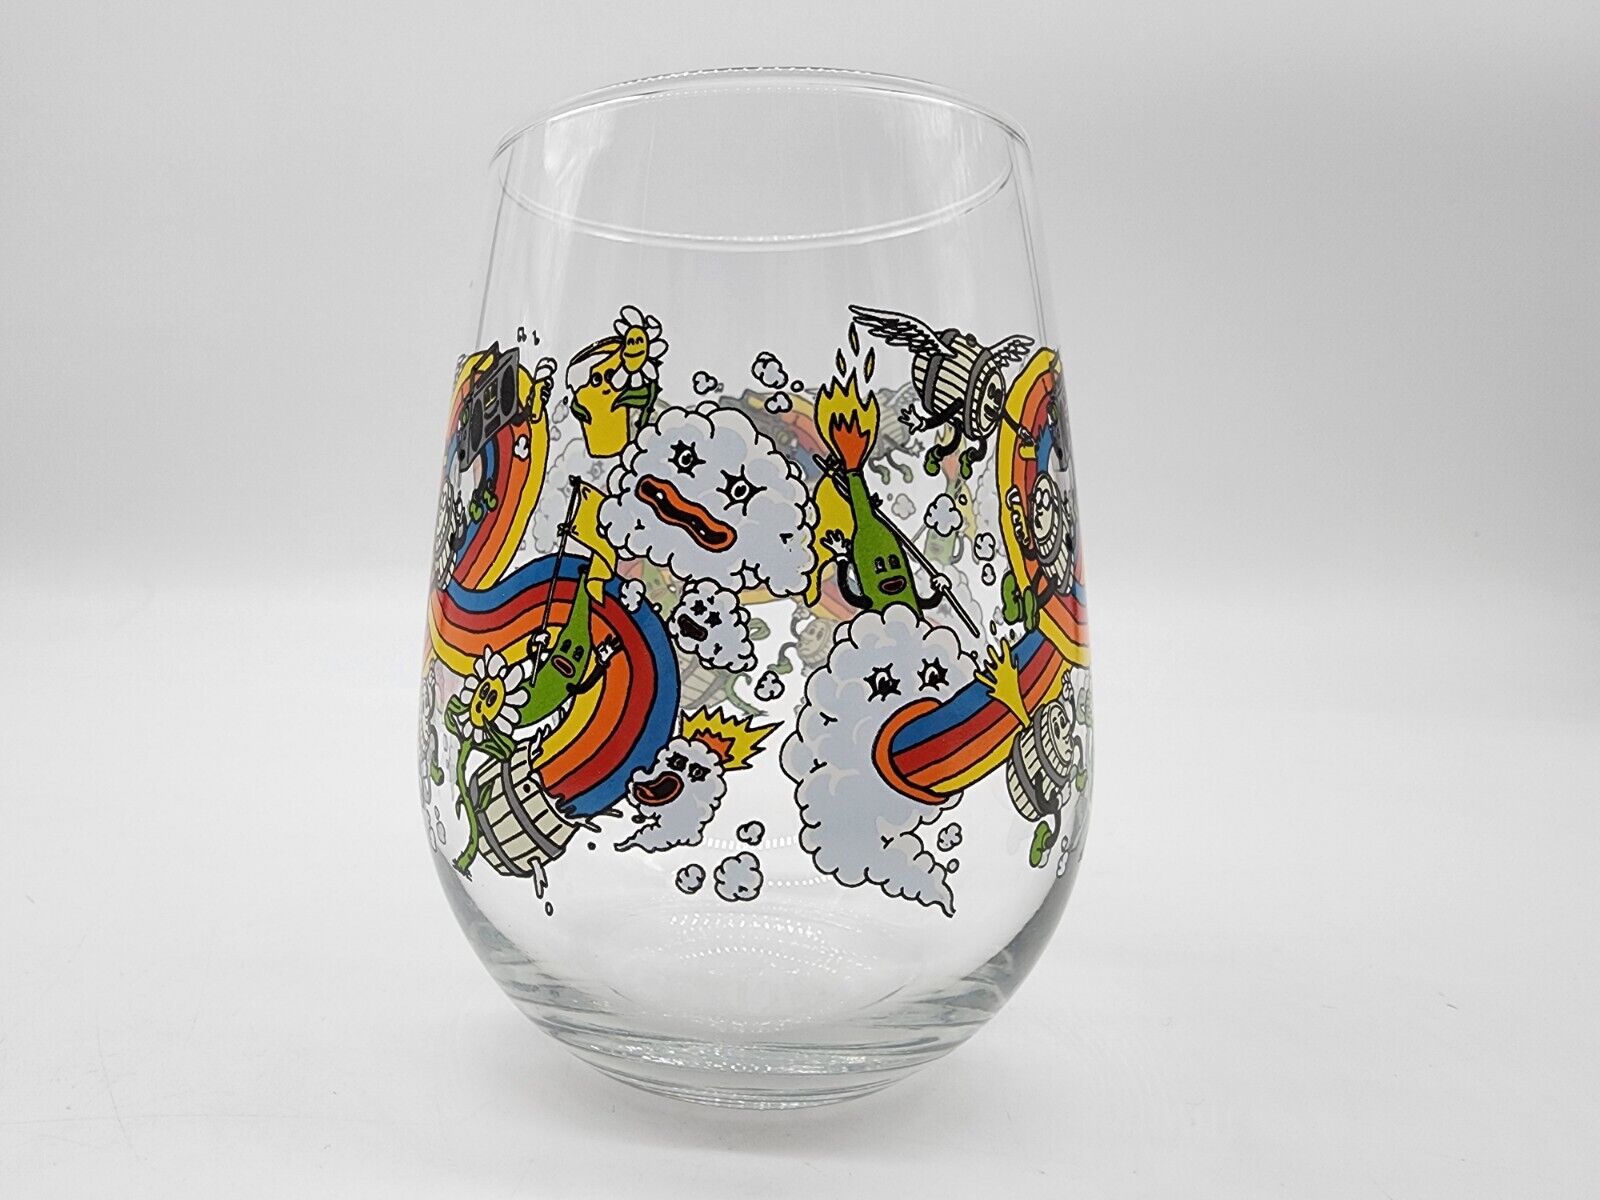 Wellington Brewery Glass doodles rainbows clouds funky unique odd stemless color